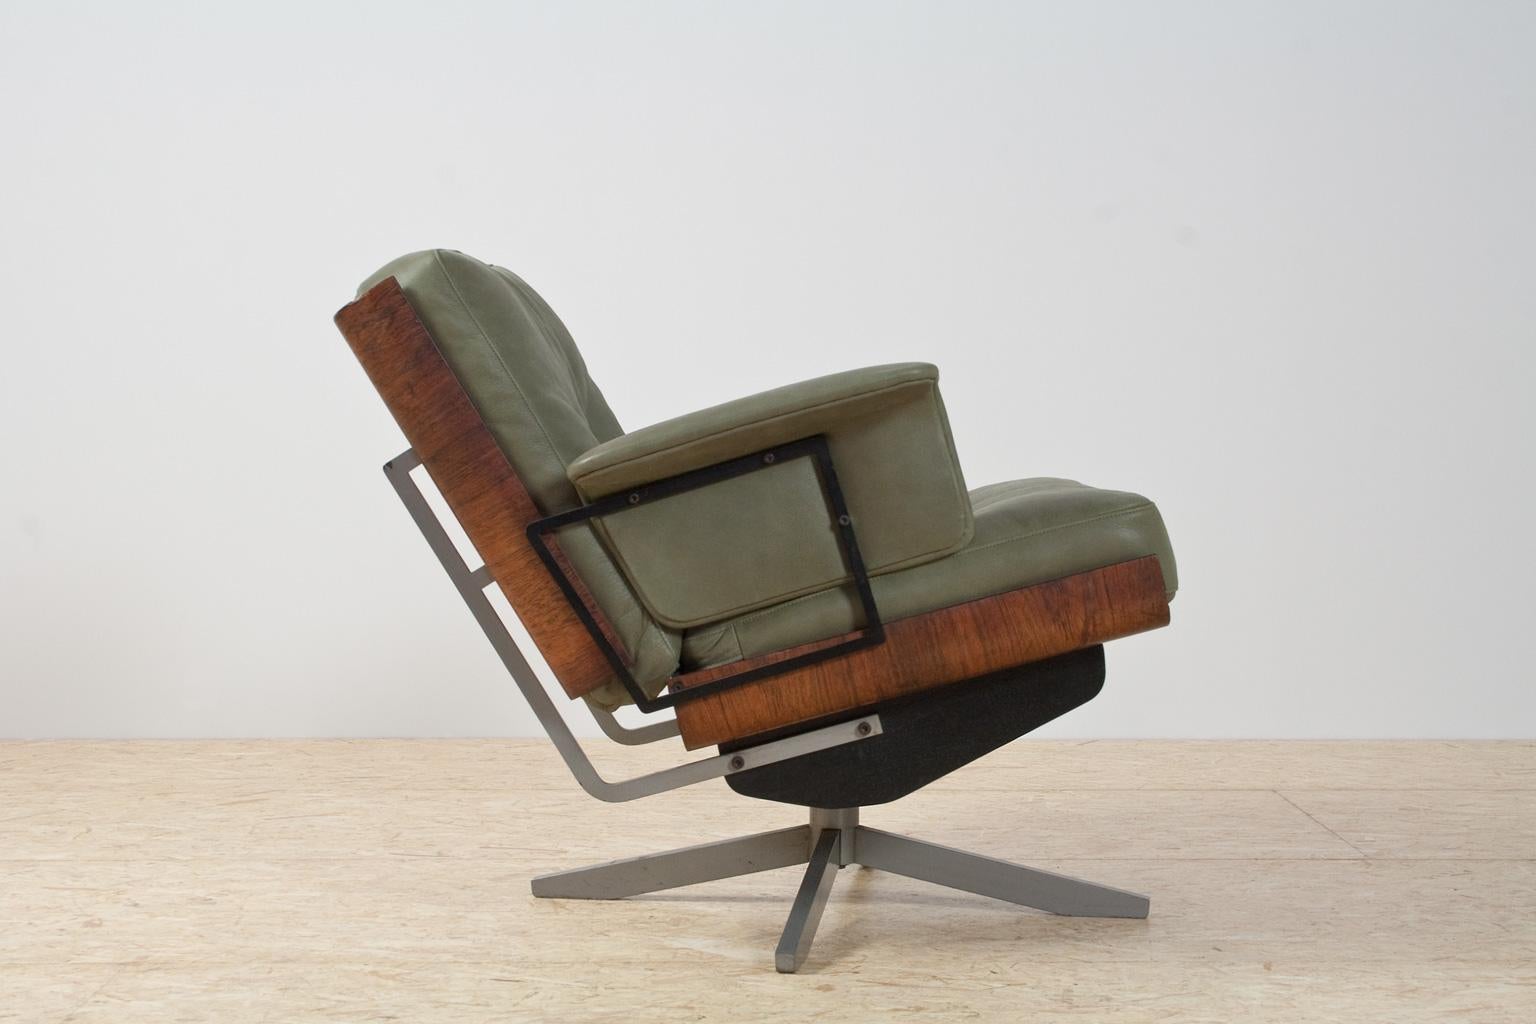 Mid-Century Modern swivel lounge chair, completely restored and re-upholstered, Germany 1950s. The chair has strong similarities with the iconic lounge chair designs of Ray and Charles Eames or with the Giroflex desk chair by Martin Stoll, yet the